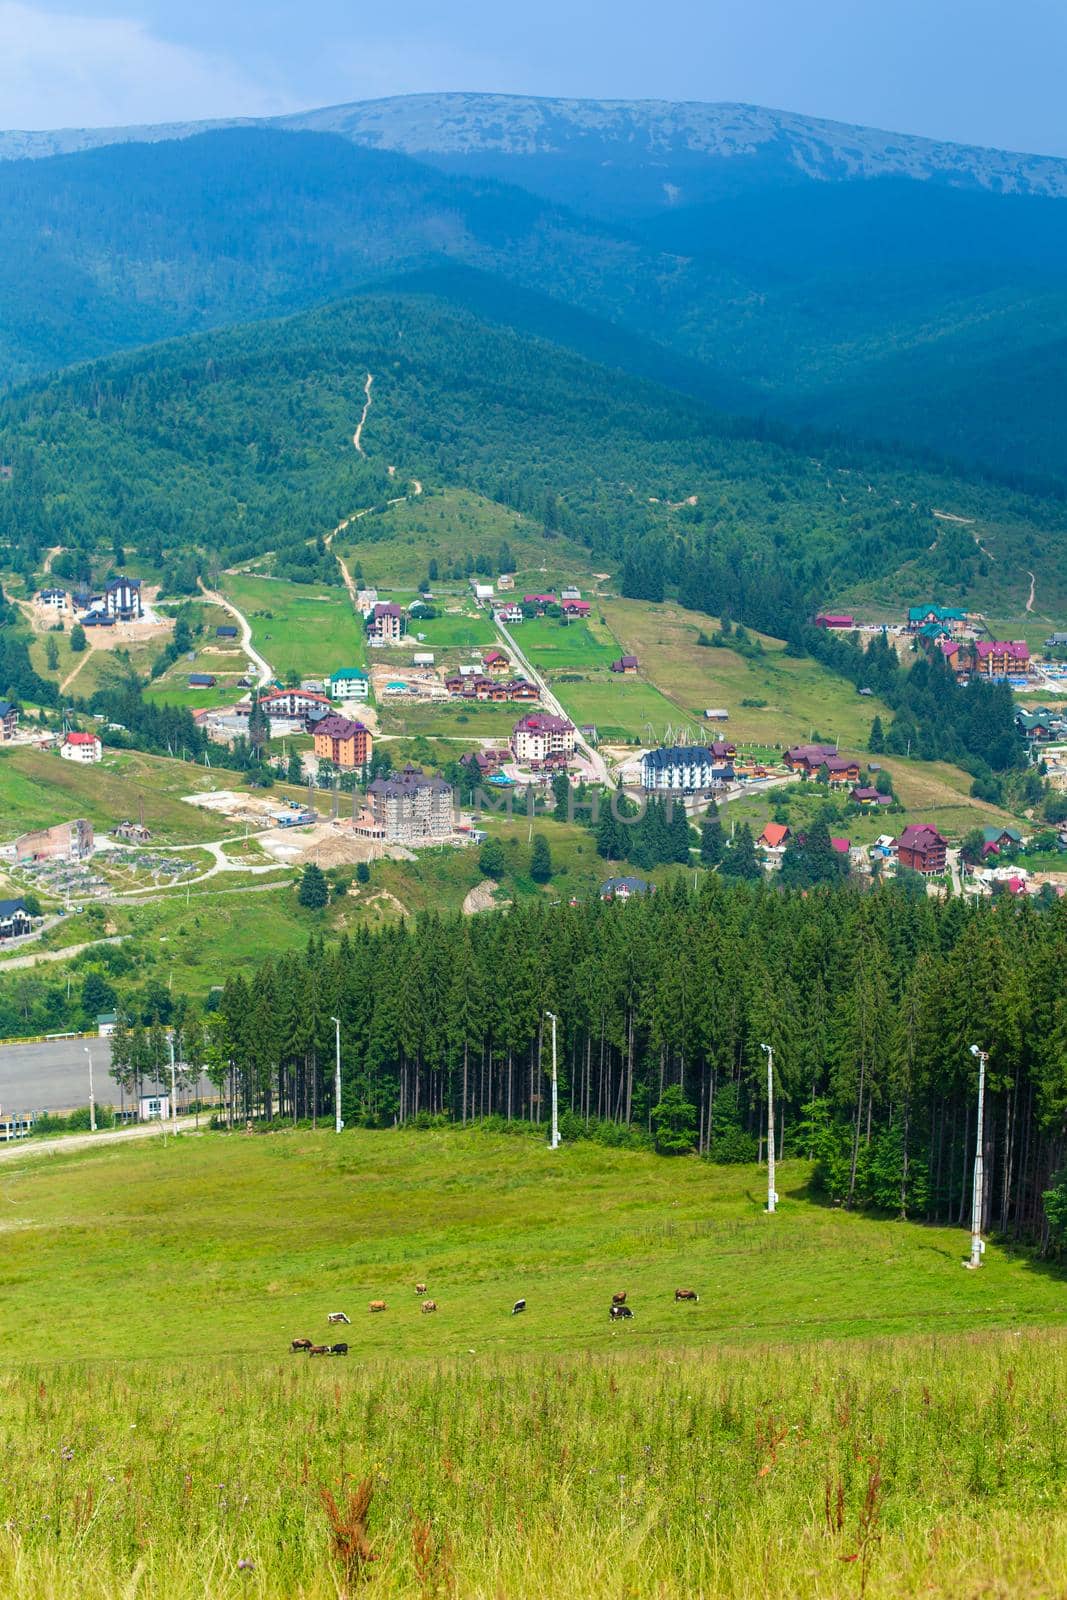 Mountain ski slope in summer day. Green mountains landscape on background.